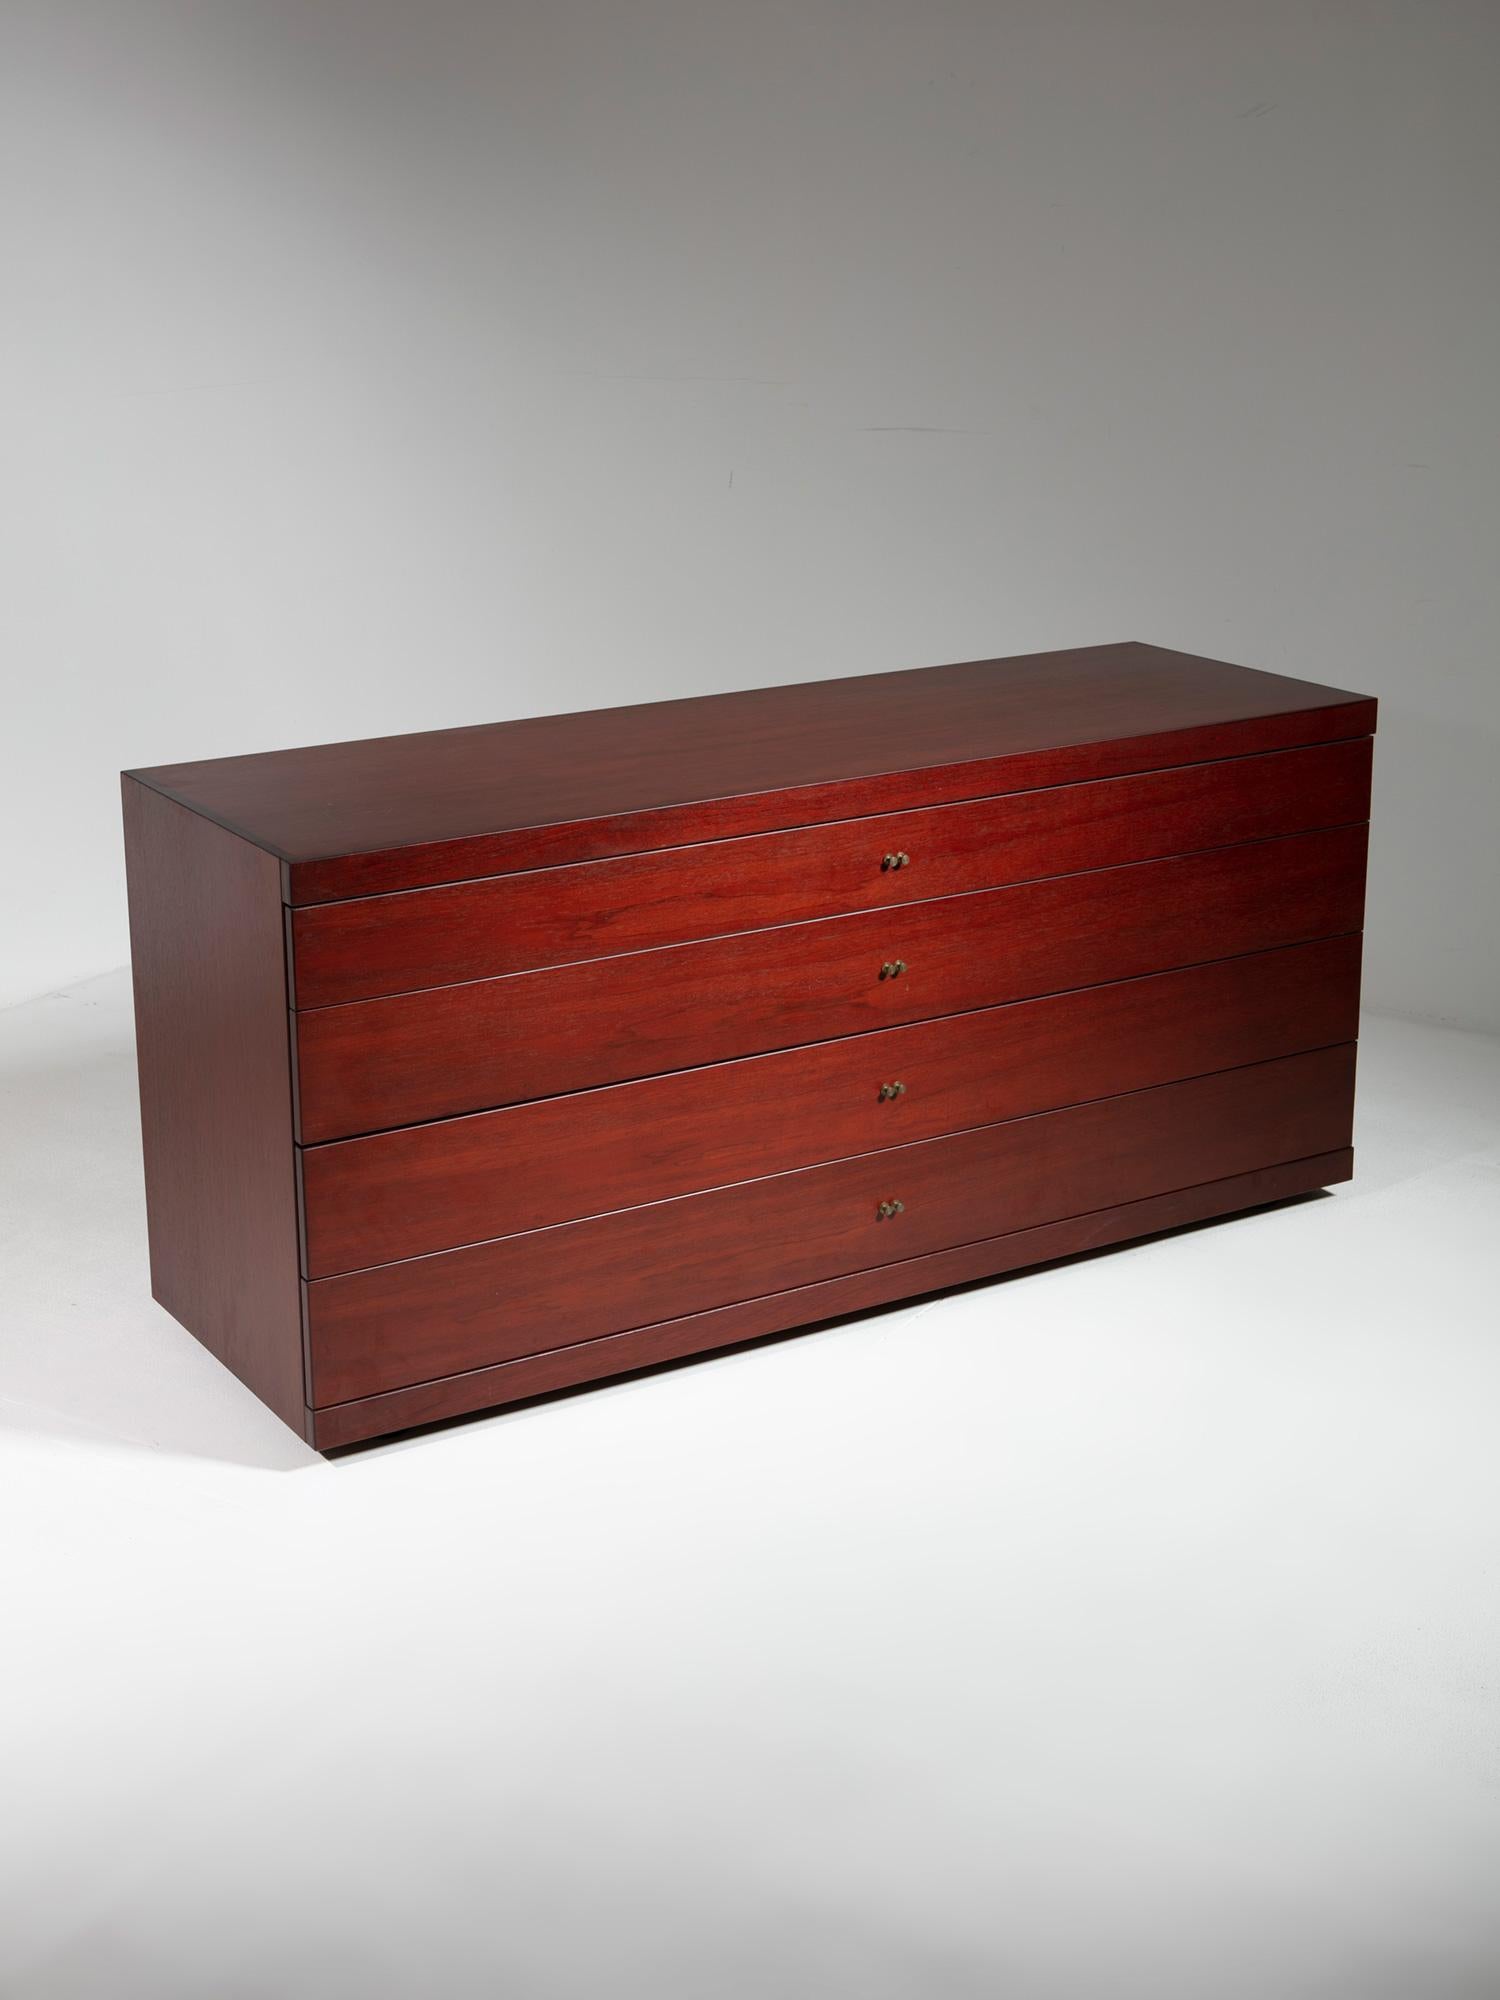 MB84 chest of drawers by Roberto Poggi for Poggi.
Capable walnut piece with four drawers and brass details.